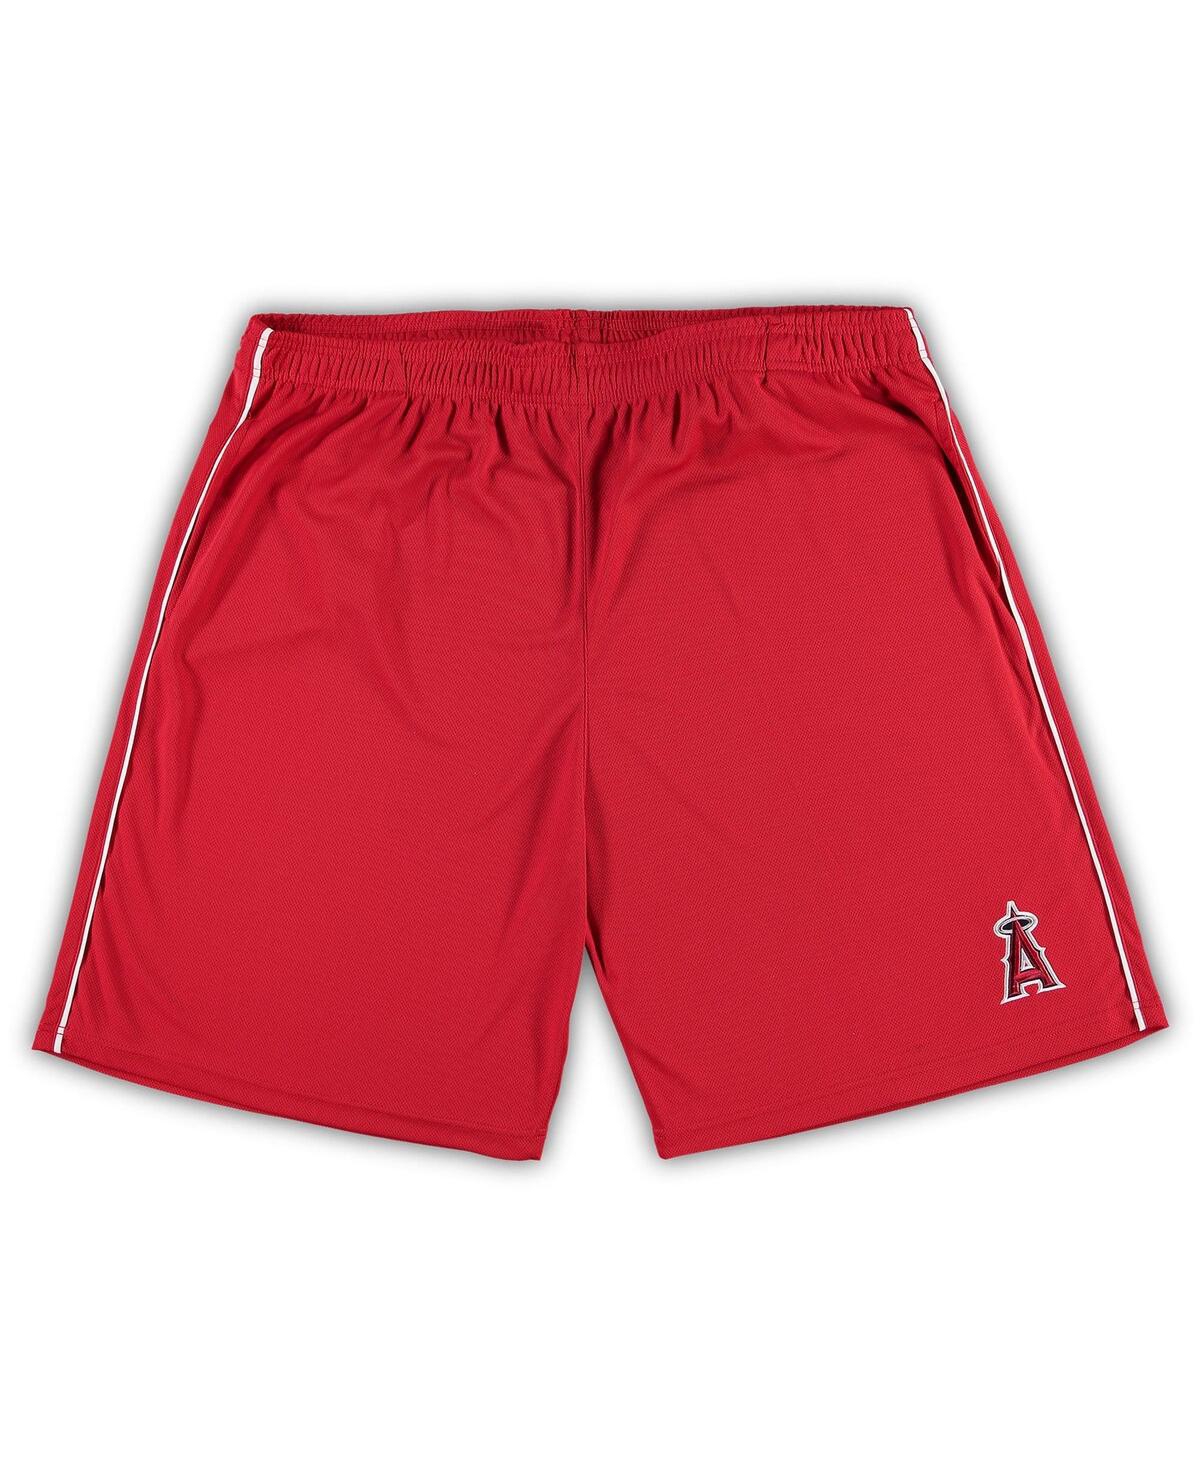 Men's Red Los Angeles Angels Big and Tall Mesh Shorts - Red